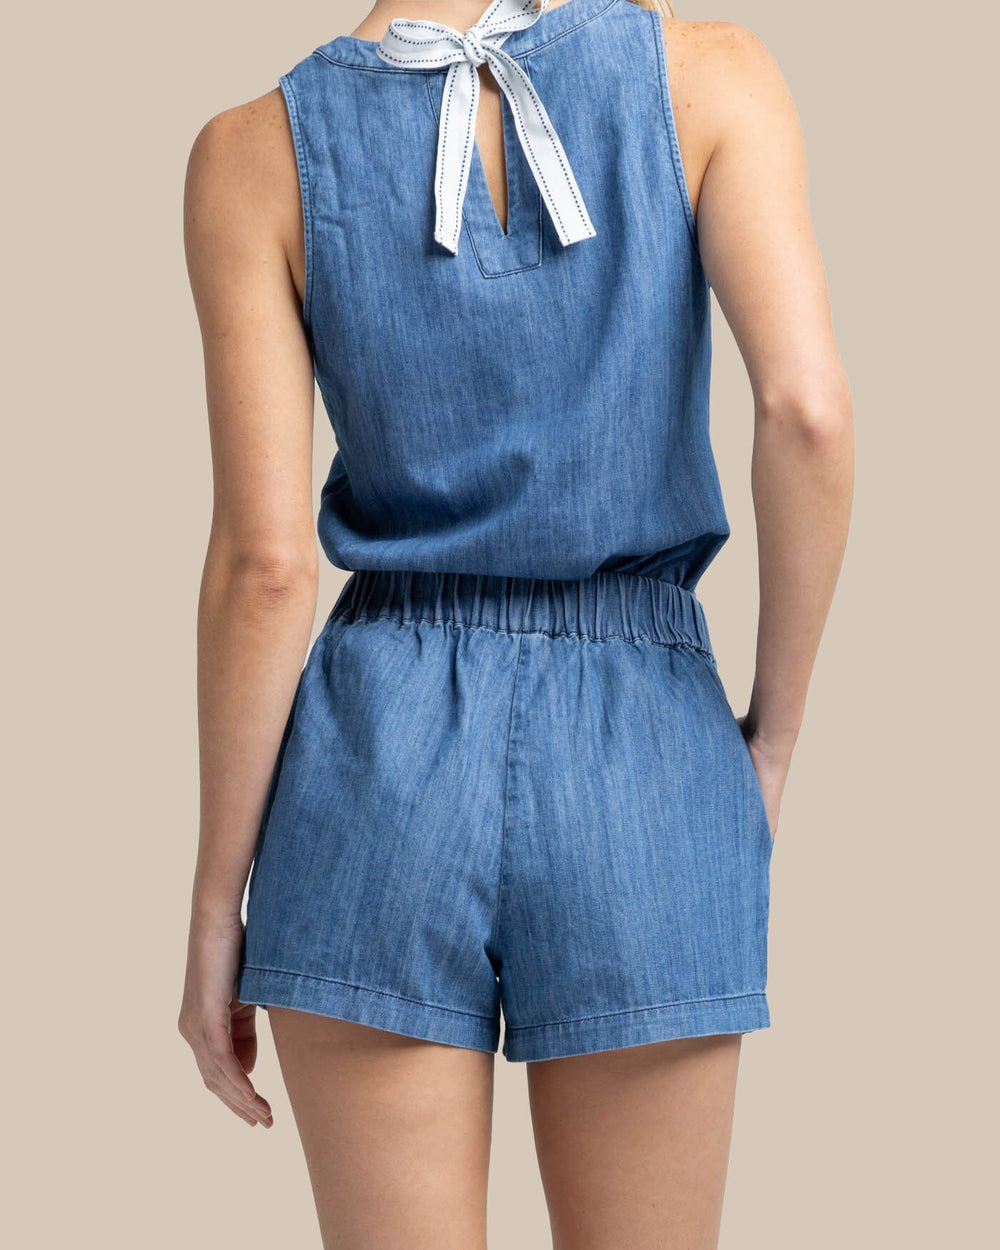 The back view of the Southern Tide Mary Ellen Denim Short by Southern Tide - Medium Wash Indigo